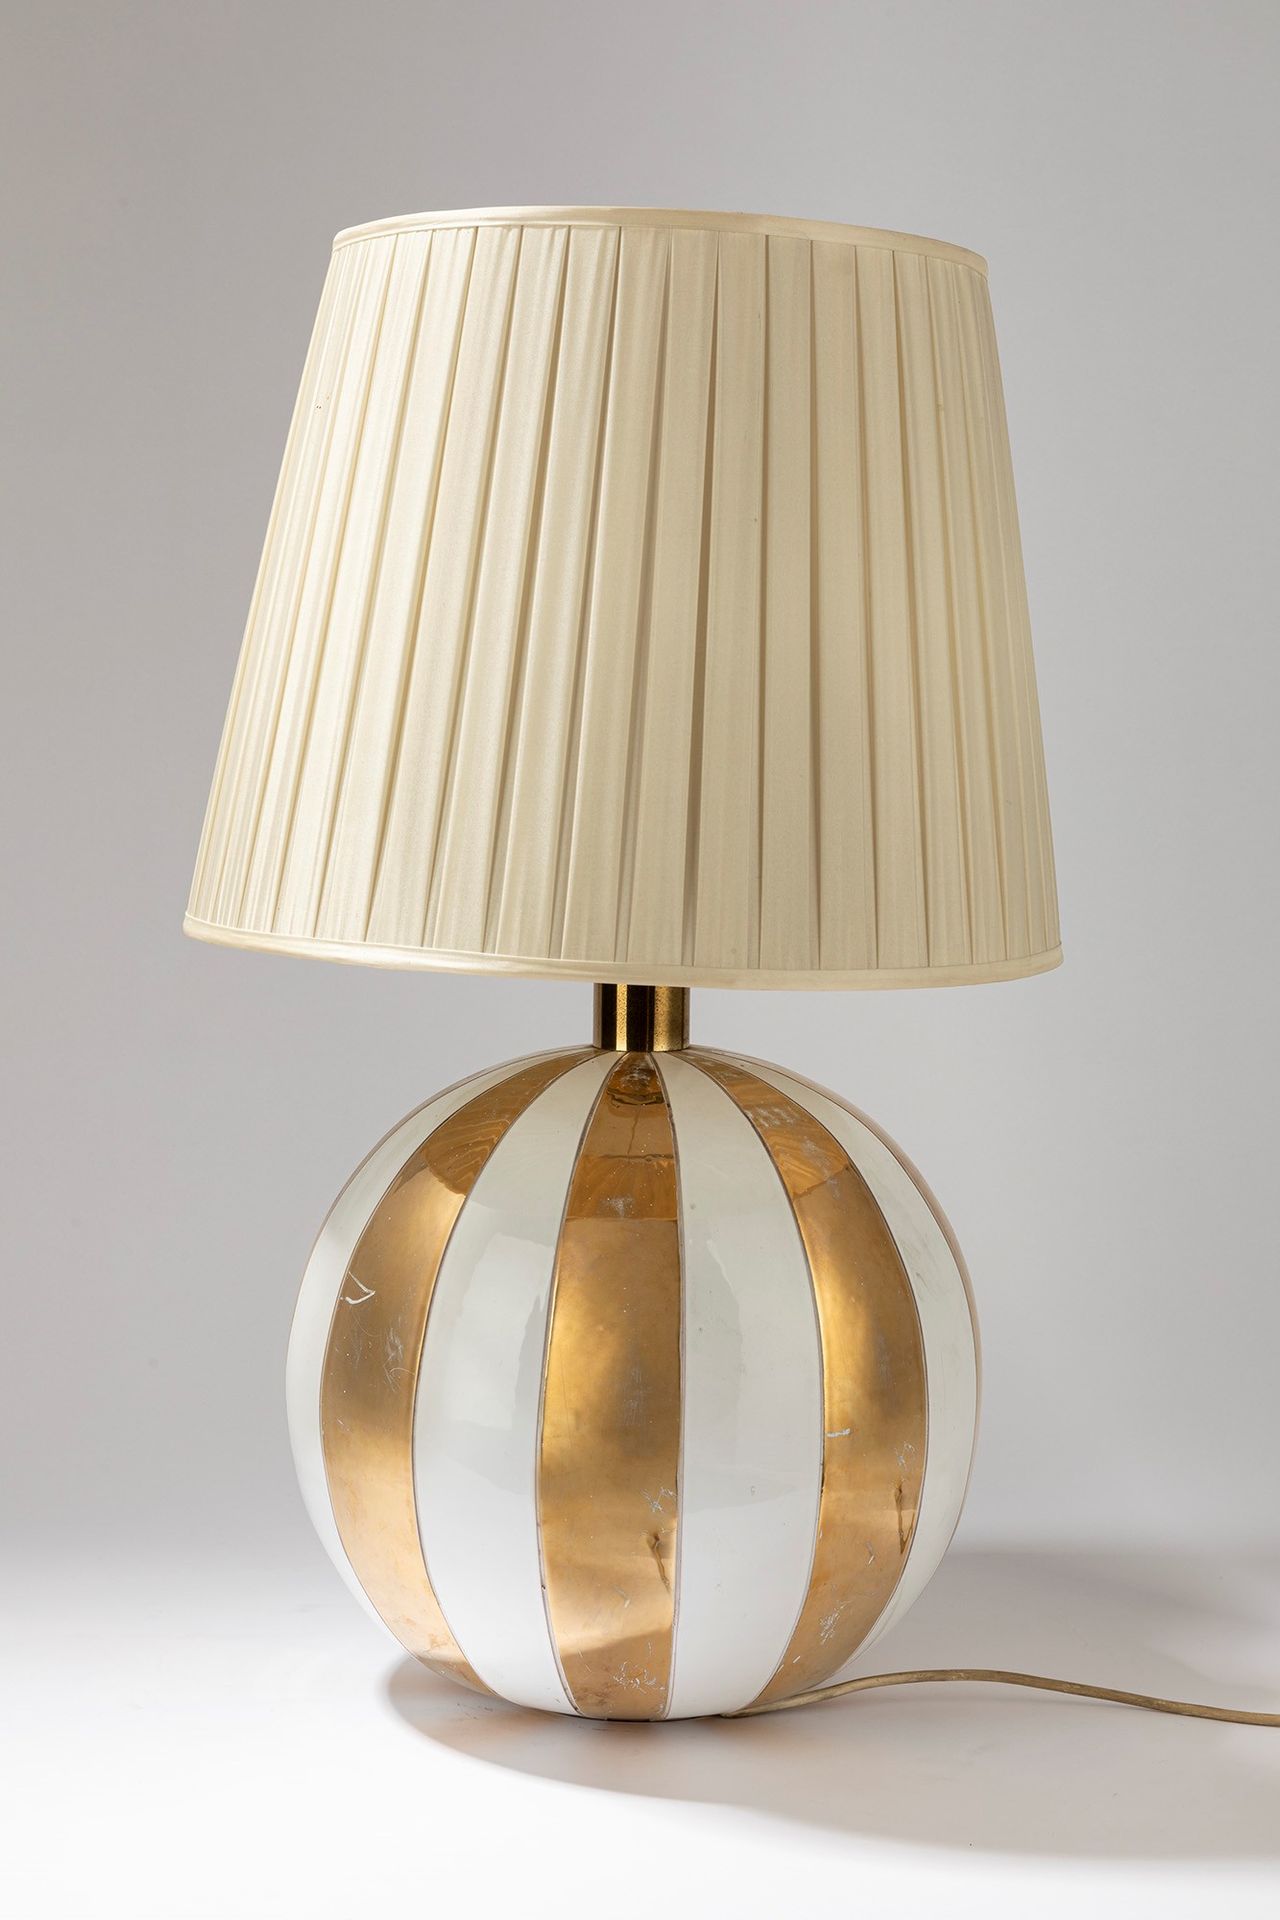 ITALIAN MANUFACTURE Table lamp, 60's period

H cm 80
in gold and white glazed ce&hellip;